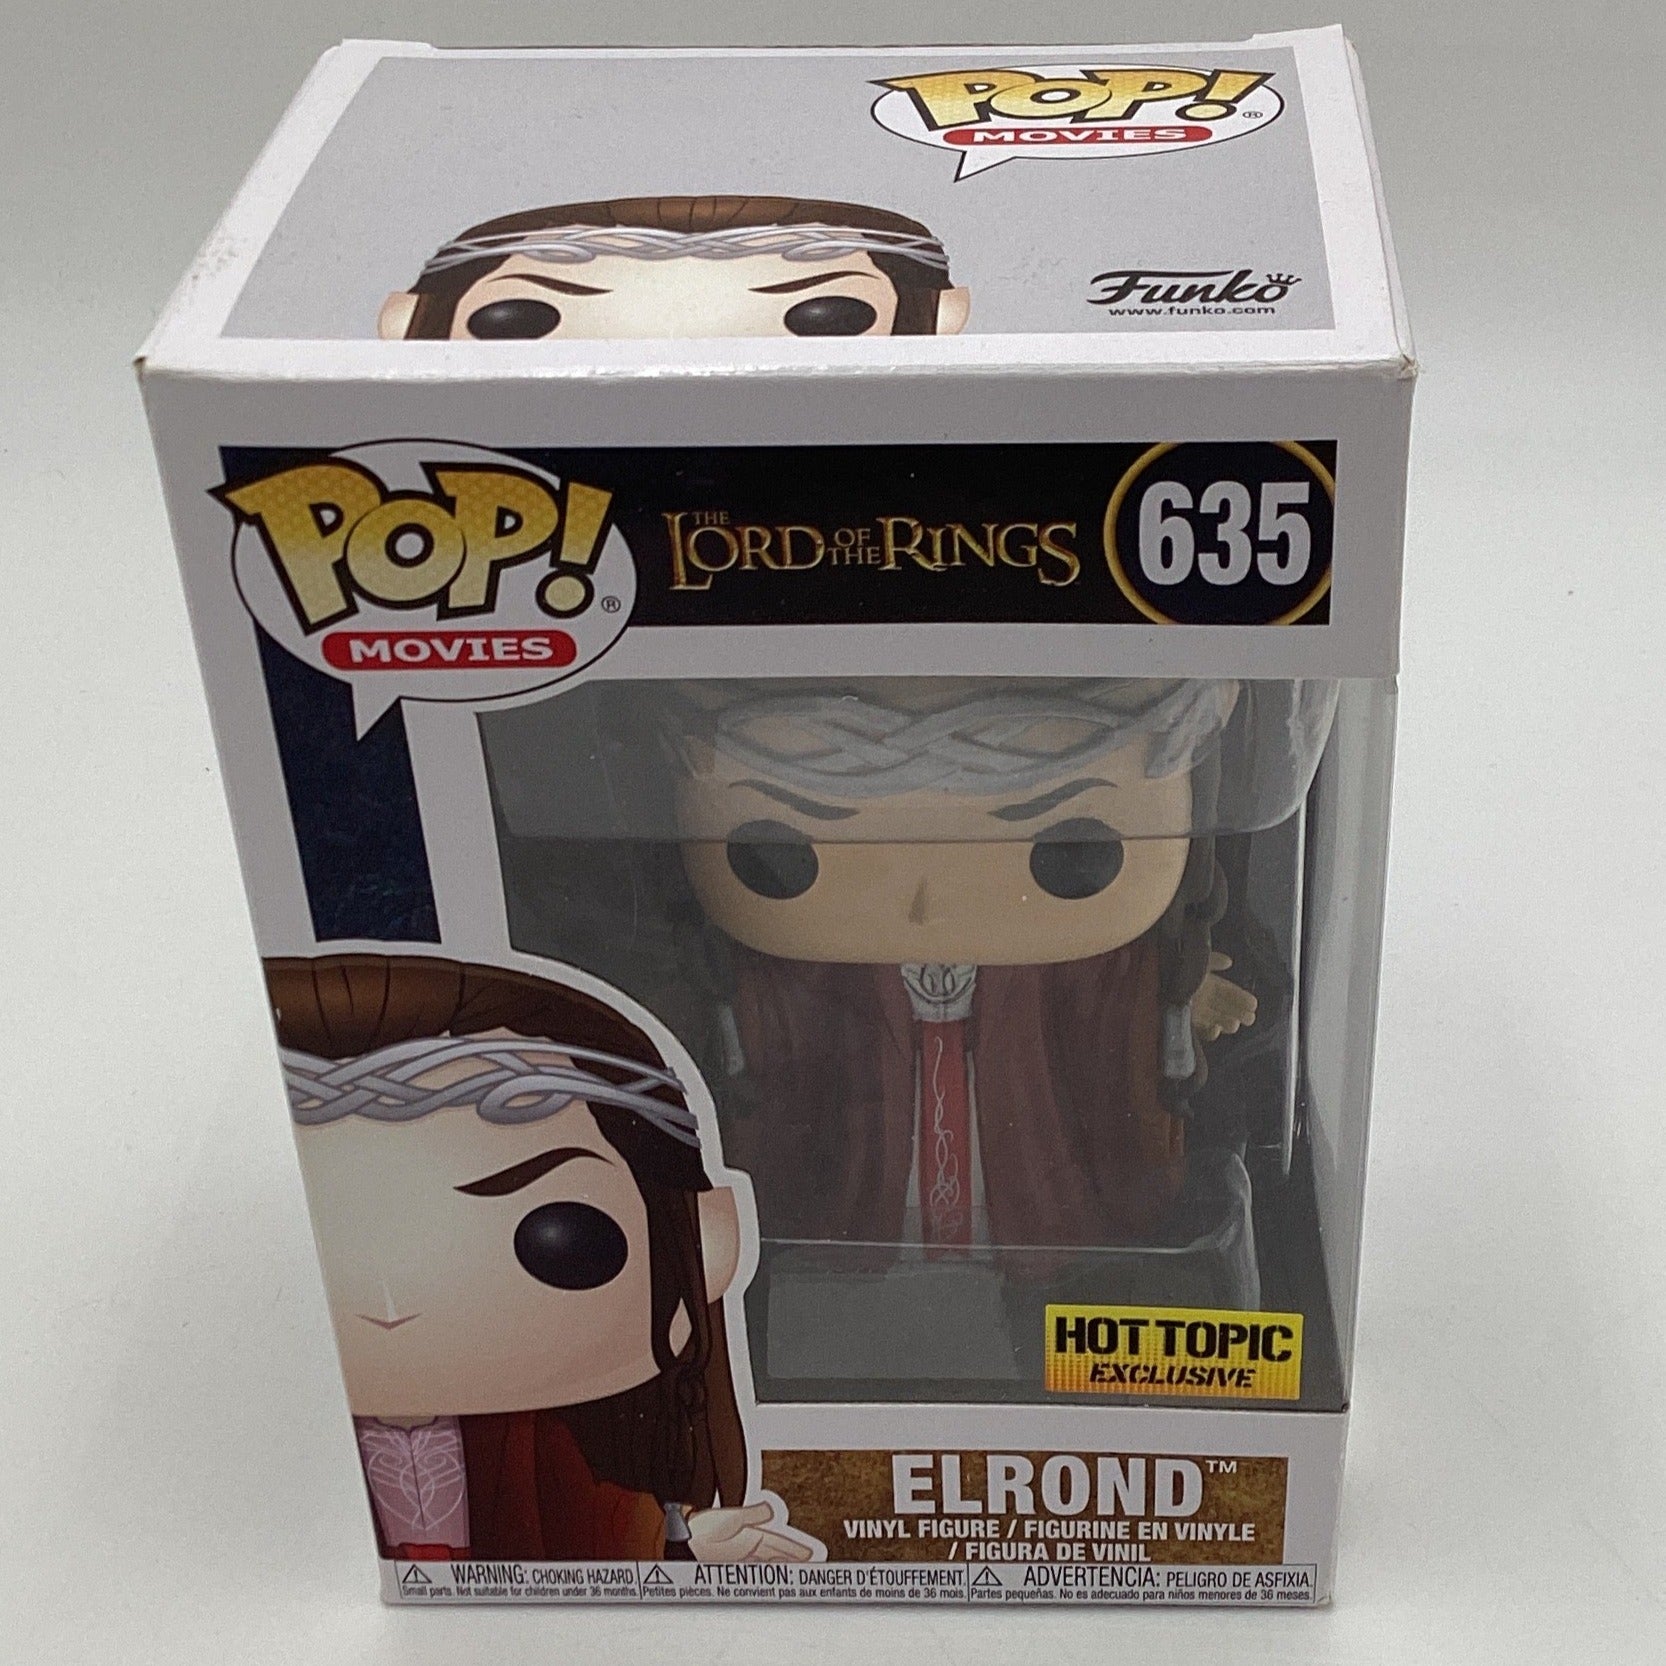 Oprør nøje cyklus Funko Pop! Movies - The Lord Of The Rings - Elrond (Hot Topic Exclusiv